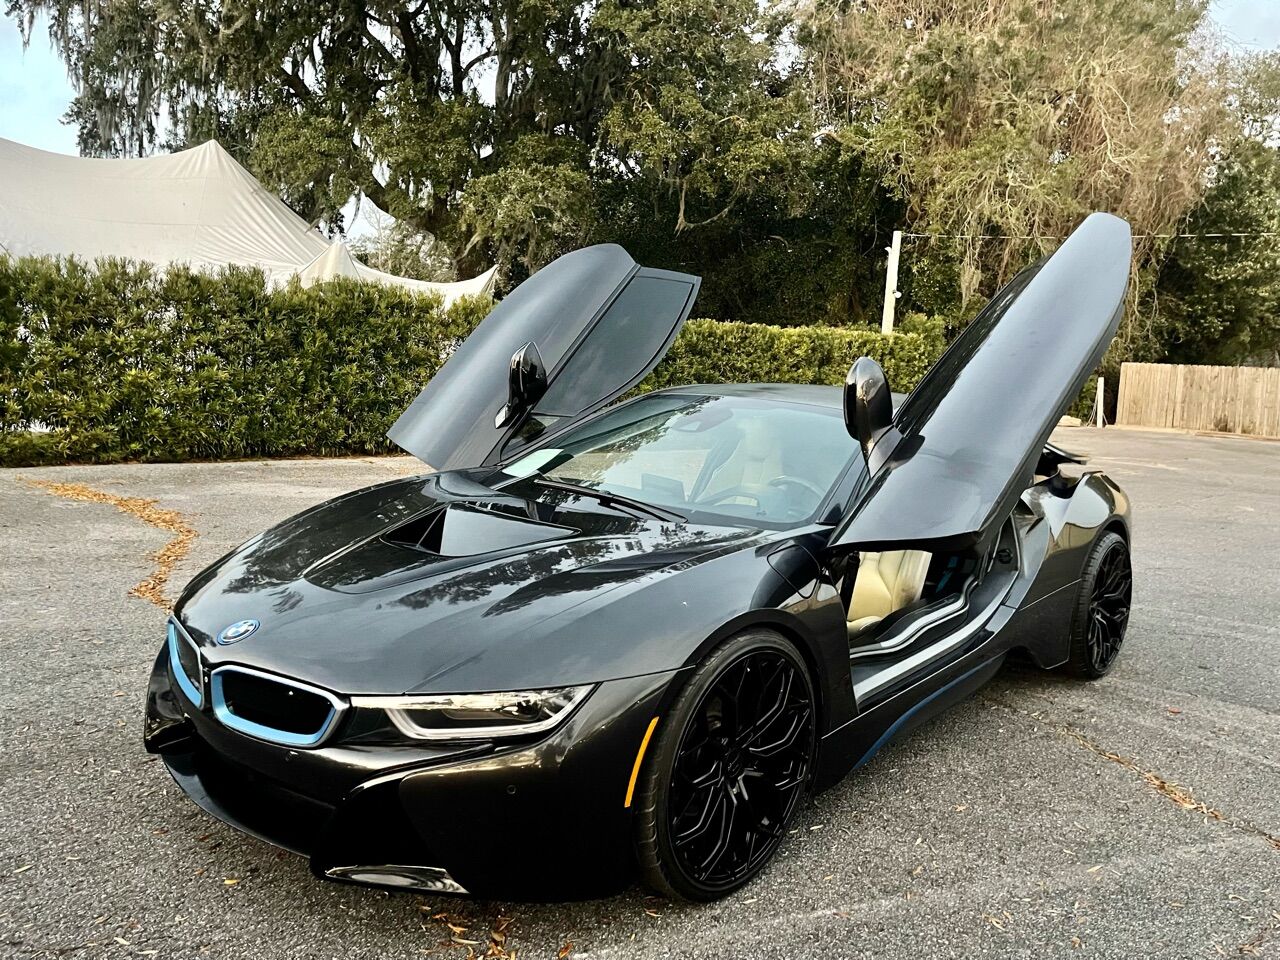 BMW i8 For Sale In Florida - Carsforsale.com®